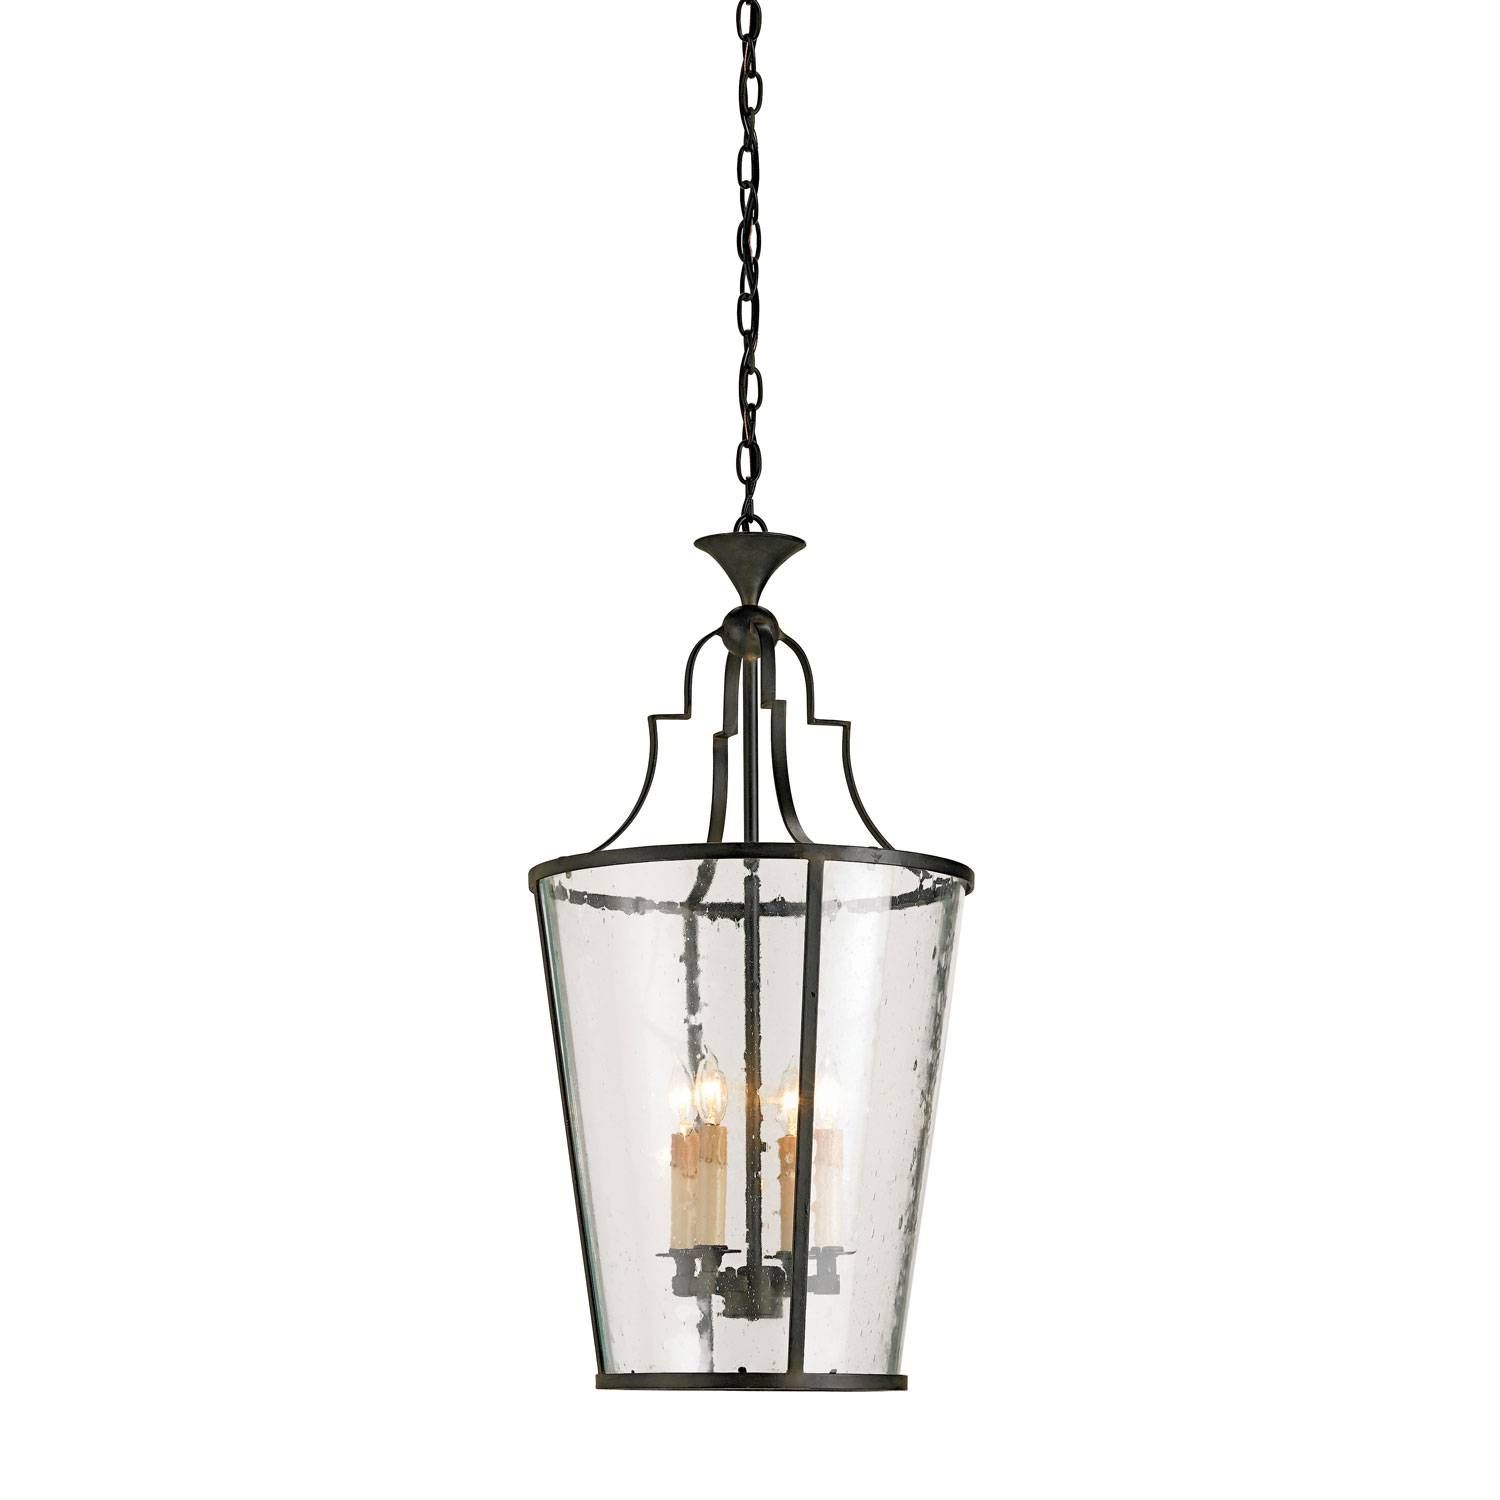 Victorian Pendant Lighting Antique Style Hanging Lights | Bellacor Intended For Lantern Style Pendant Lights (View 8 of 15)